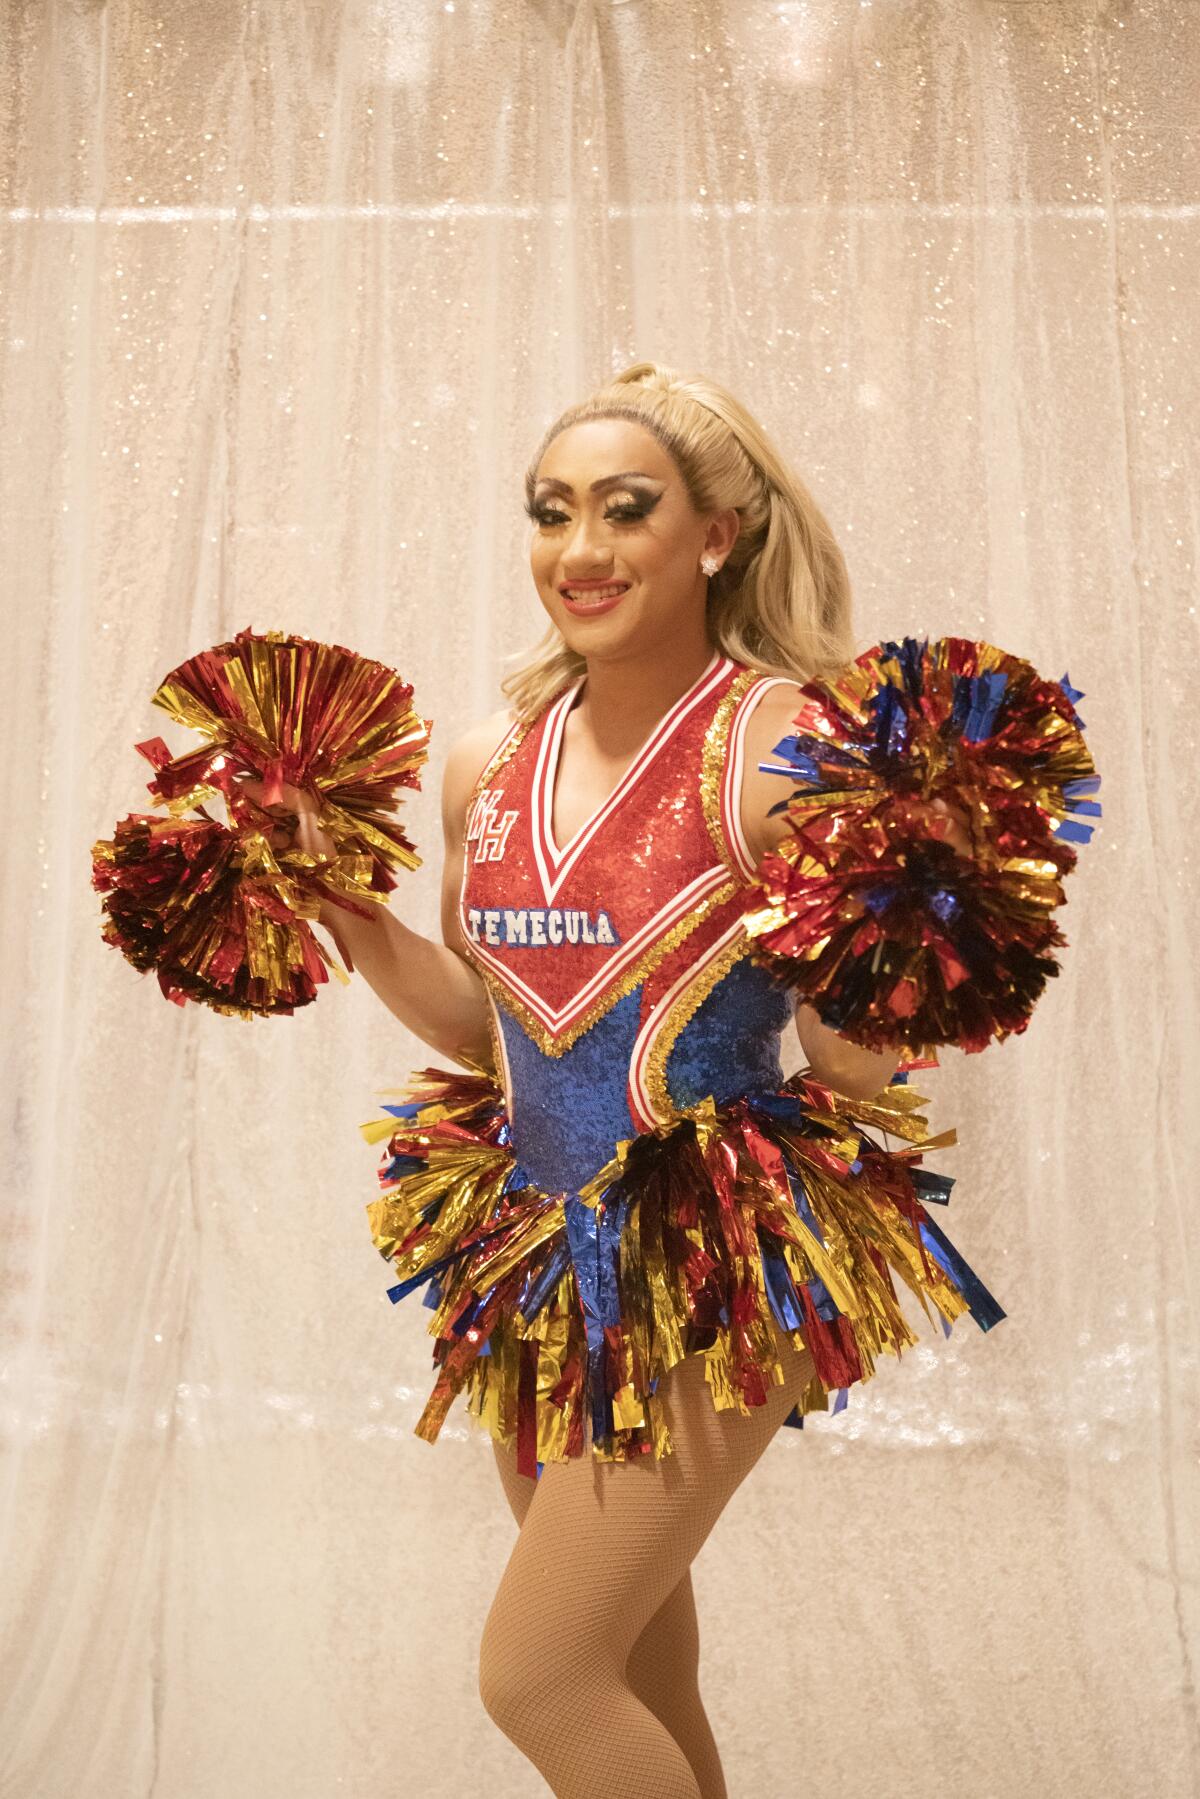 Andrei Manila holding pom-poms in a red, blue and gold cheerleader outfit